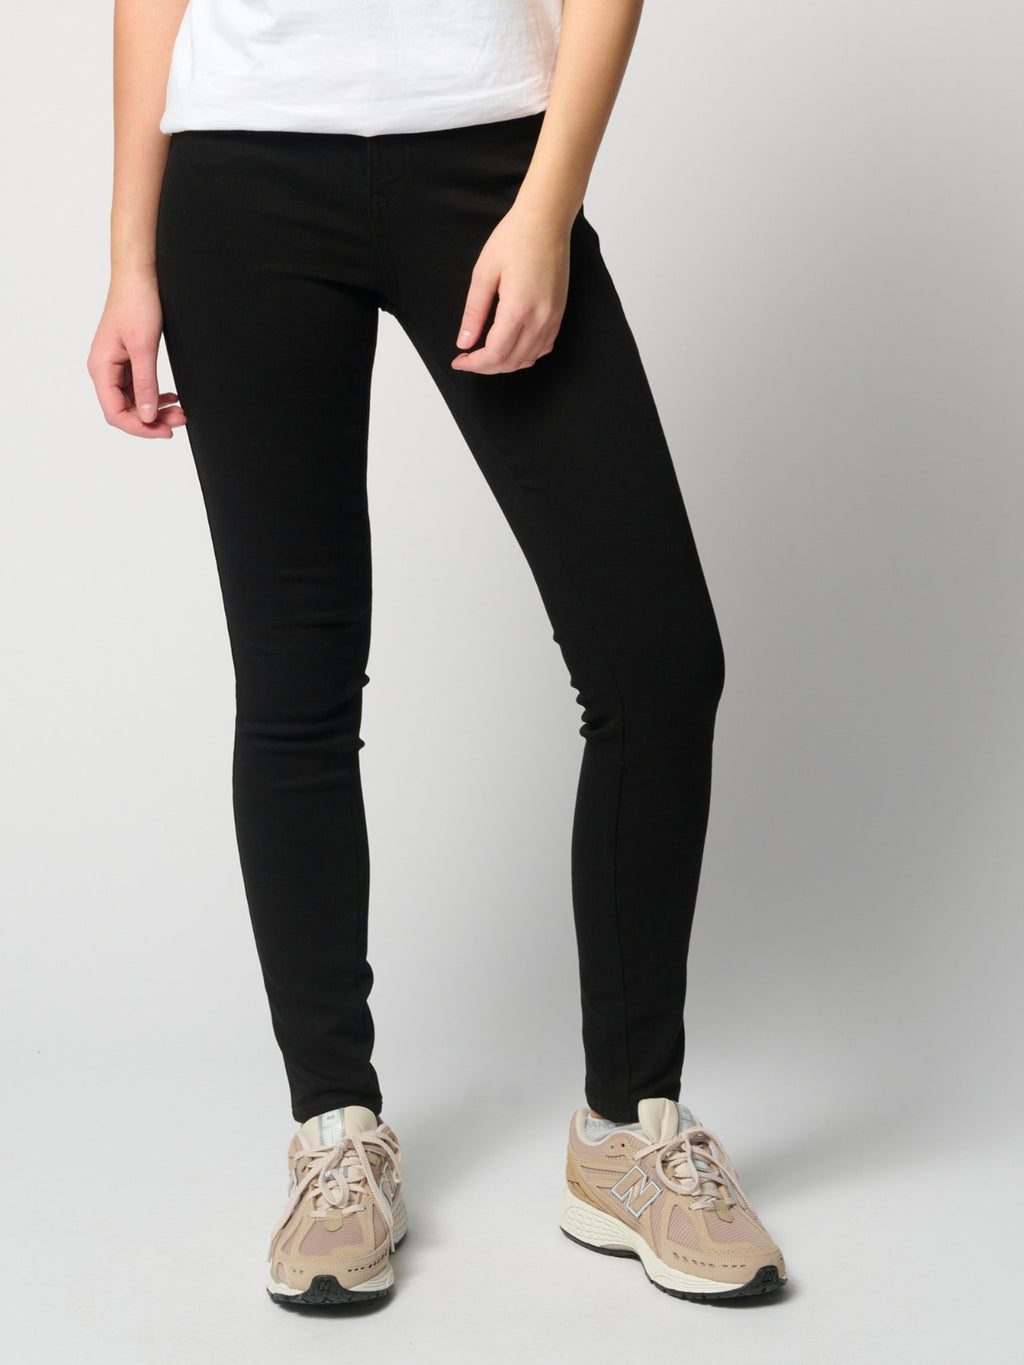 The Original Performance Skinny Jeans ™ ️ Mujeres - Paquete (3 pcs).